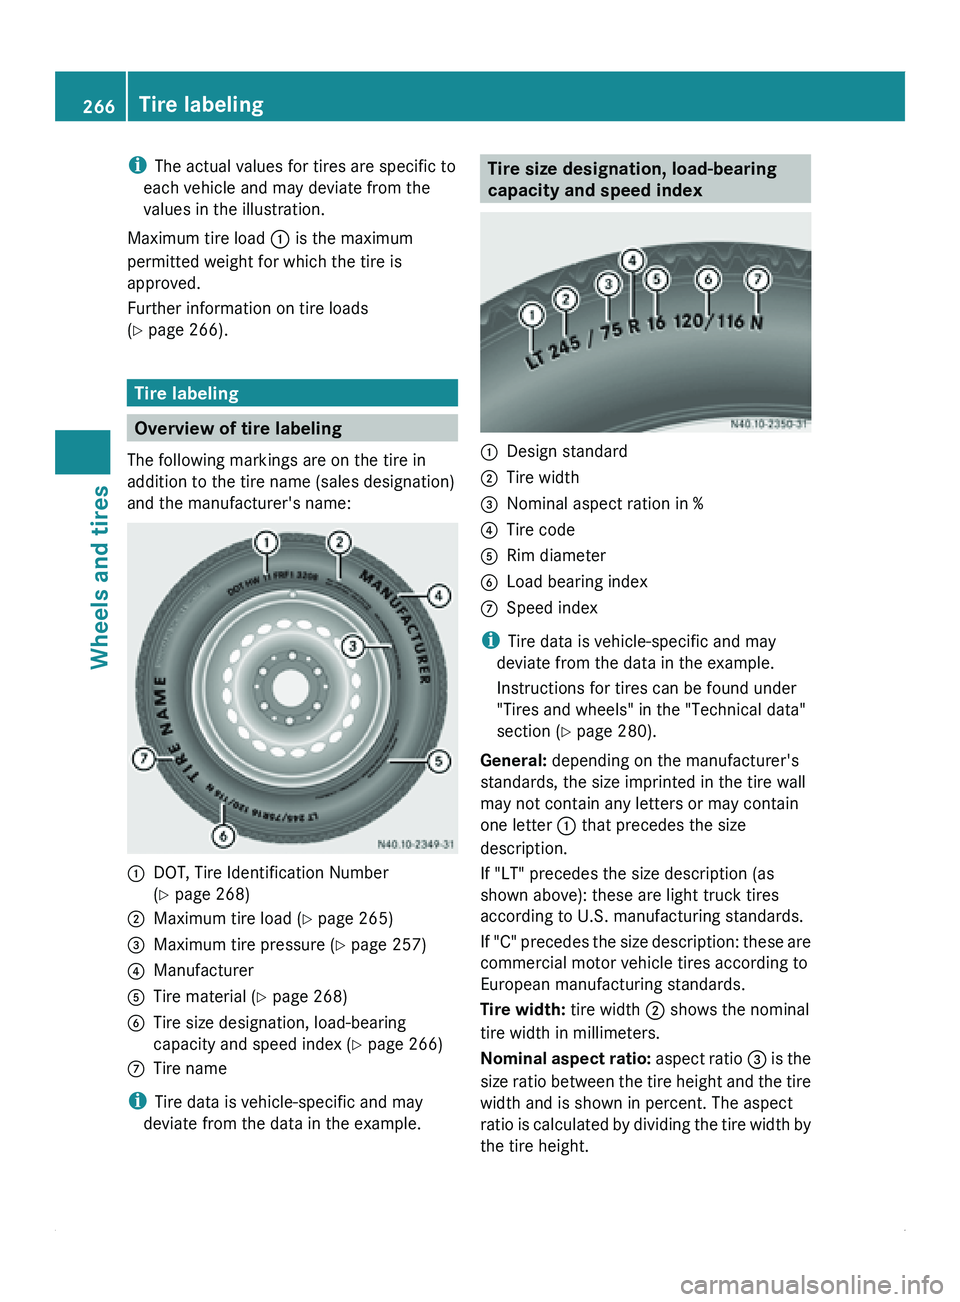 MERCEDES-BENZ SPRINTER 2011  MY11 Operator’s Manual i
The actual values for tires are specific to
each vehicle and may deviate from the
values in the illustration.
Maximum tire load  0046 is the maximum
permitted weight for which the tire is
approved.
